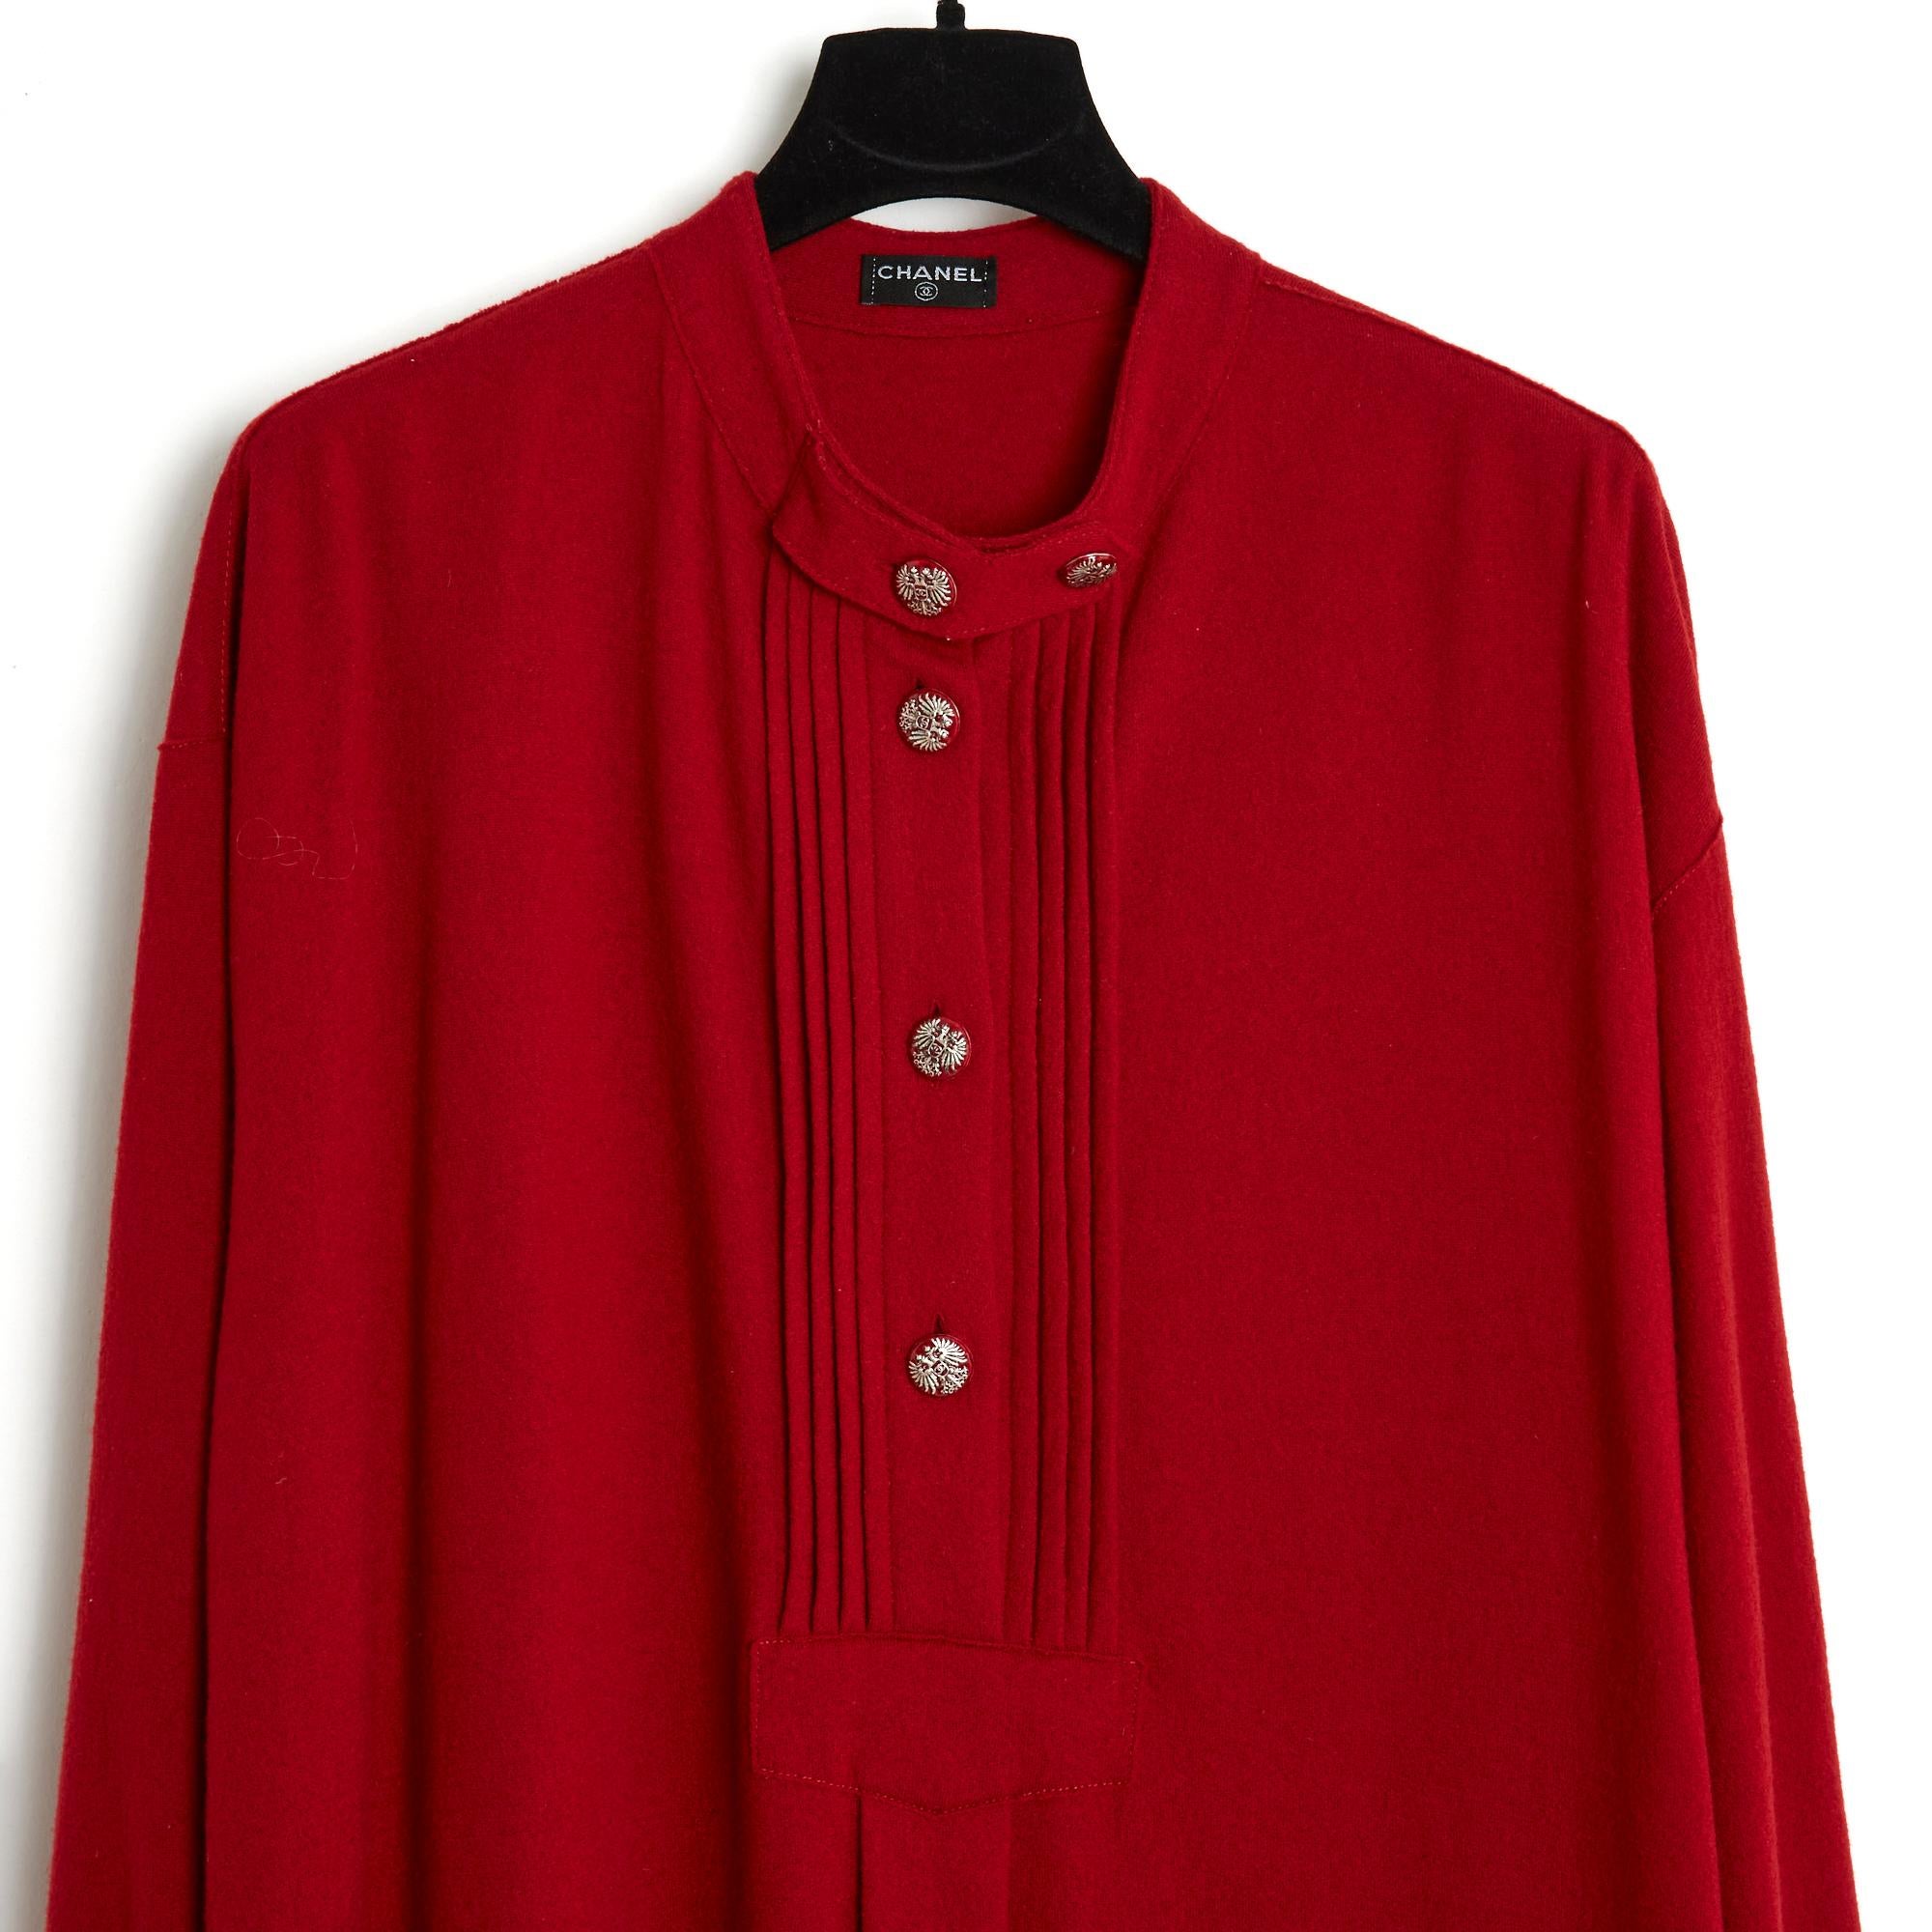 Chanel dress from the Métiers d'Art 2015 collection in Salzburg, oversized volume, short or tunic, in dark red wool, small round collar, pique pleated bib fastened with 5 jeweled buttons, long sleeves with open cuffs (!), without buttonhole or